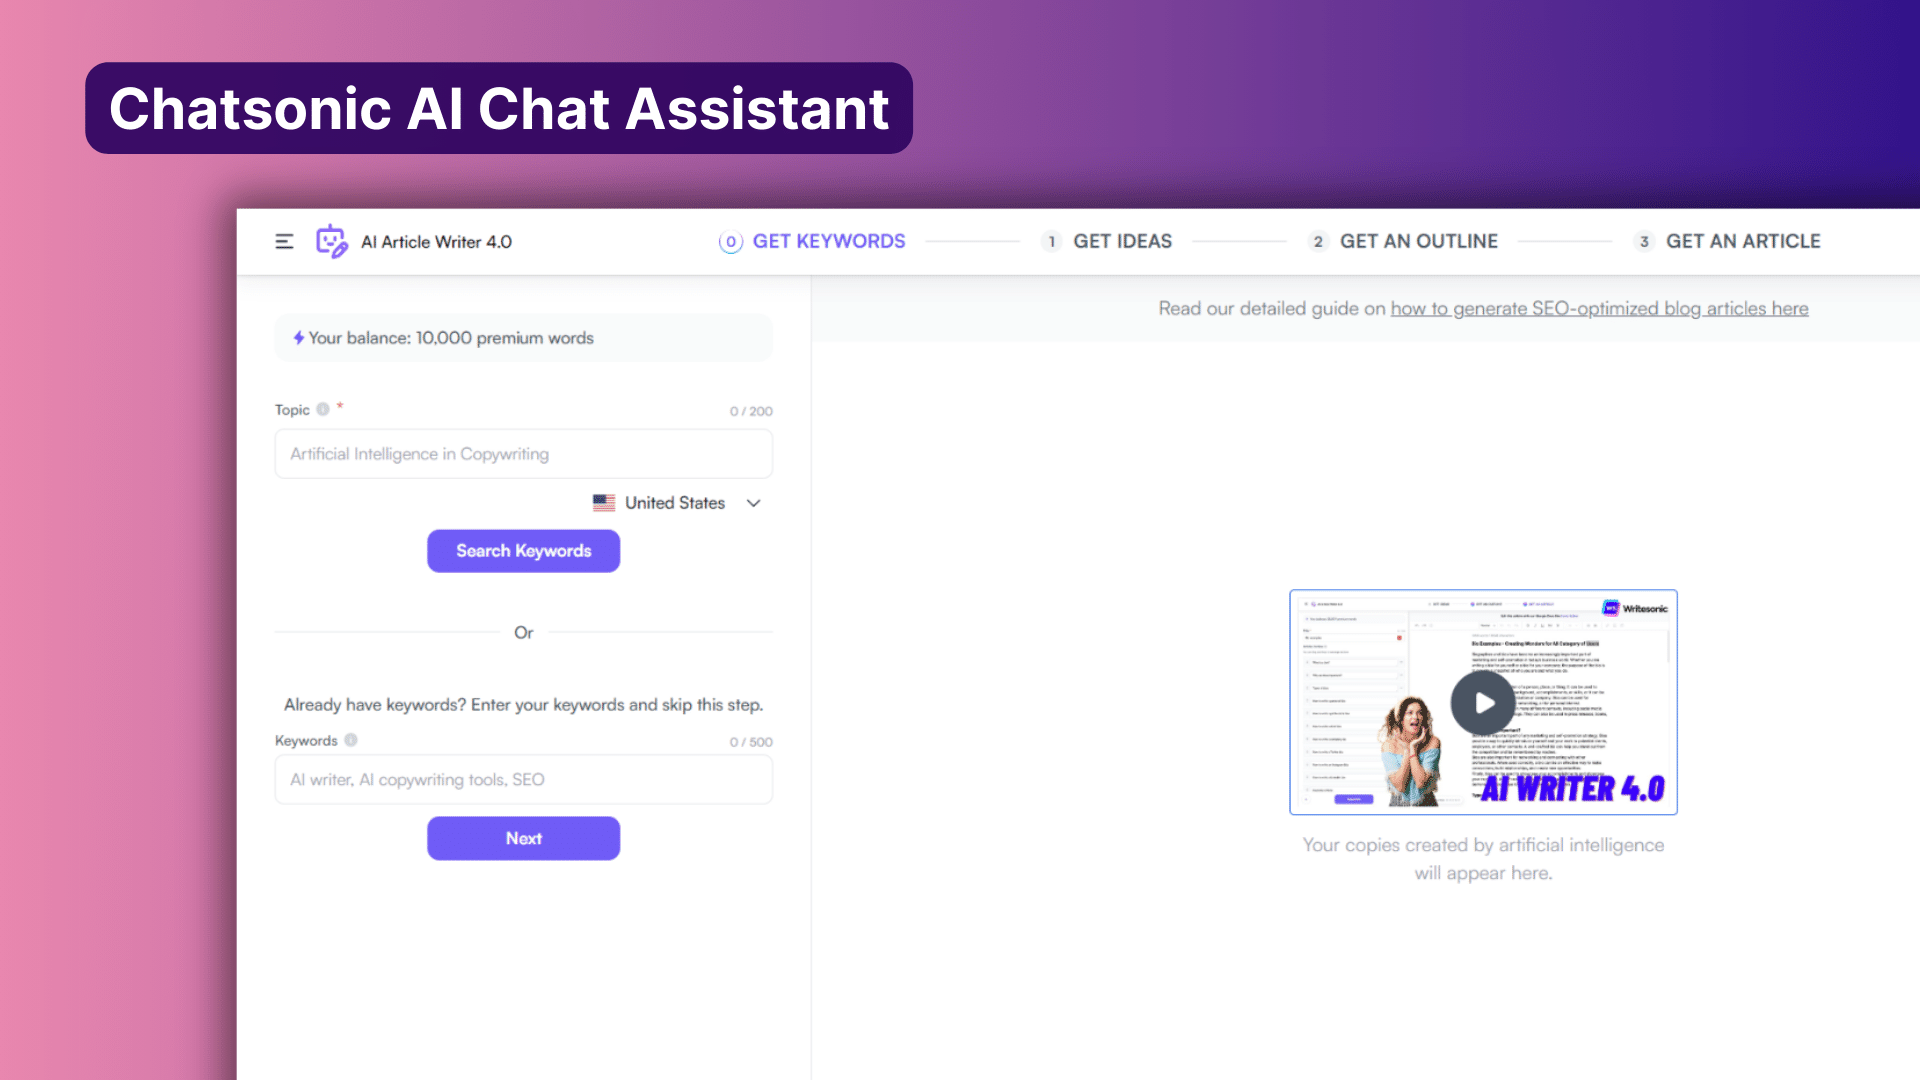 Chatsonic AI Chat Assistant